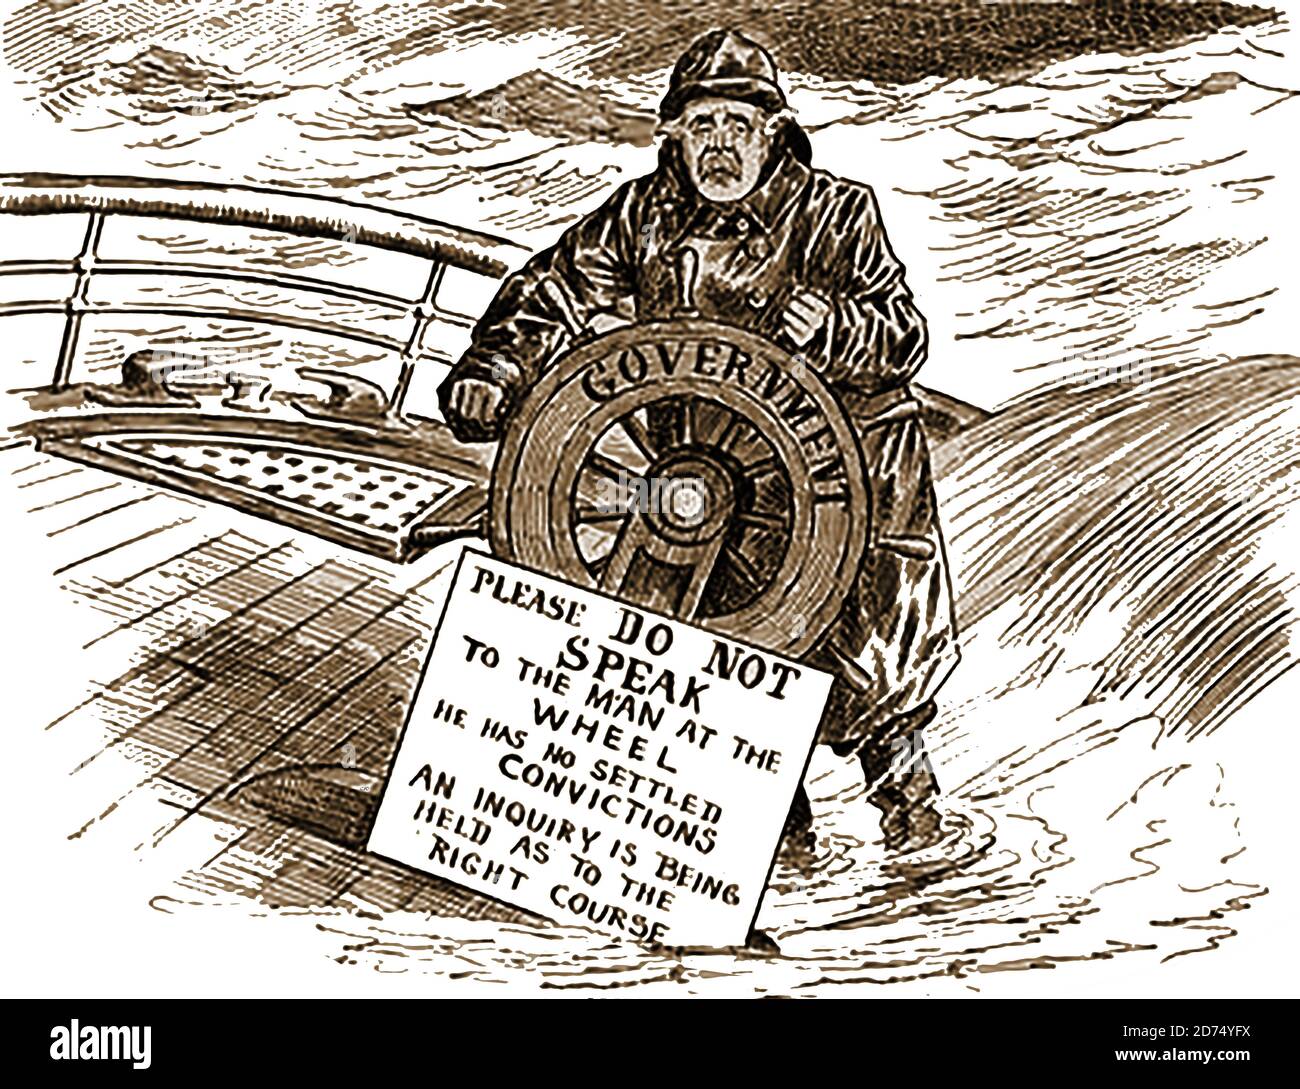 An old English satirical cartoon featuring Arthur James Balfour ,the  1st Earl of Balfour,  (1848 – 1930)   Conservative Prime Minister of the United Kingdom from 1902 to 1905. He's seen at the wheel of the foundering ship 'Government' . He suffered from public anger at the end of the Boer war  for 'counter-insurgency warfare and  barbarism' as well as  the importation of Chinese labour to South Africa ('Chinese slavery'). He resigned as prime minister in December 1905 Stock Photo